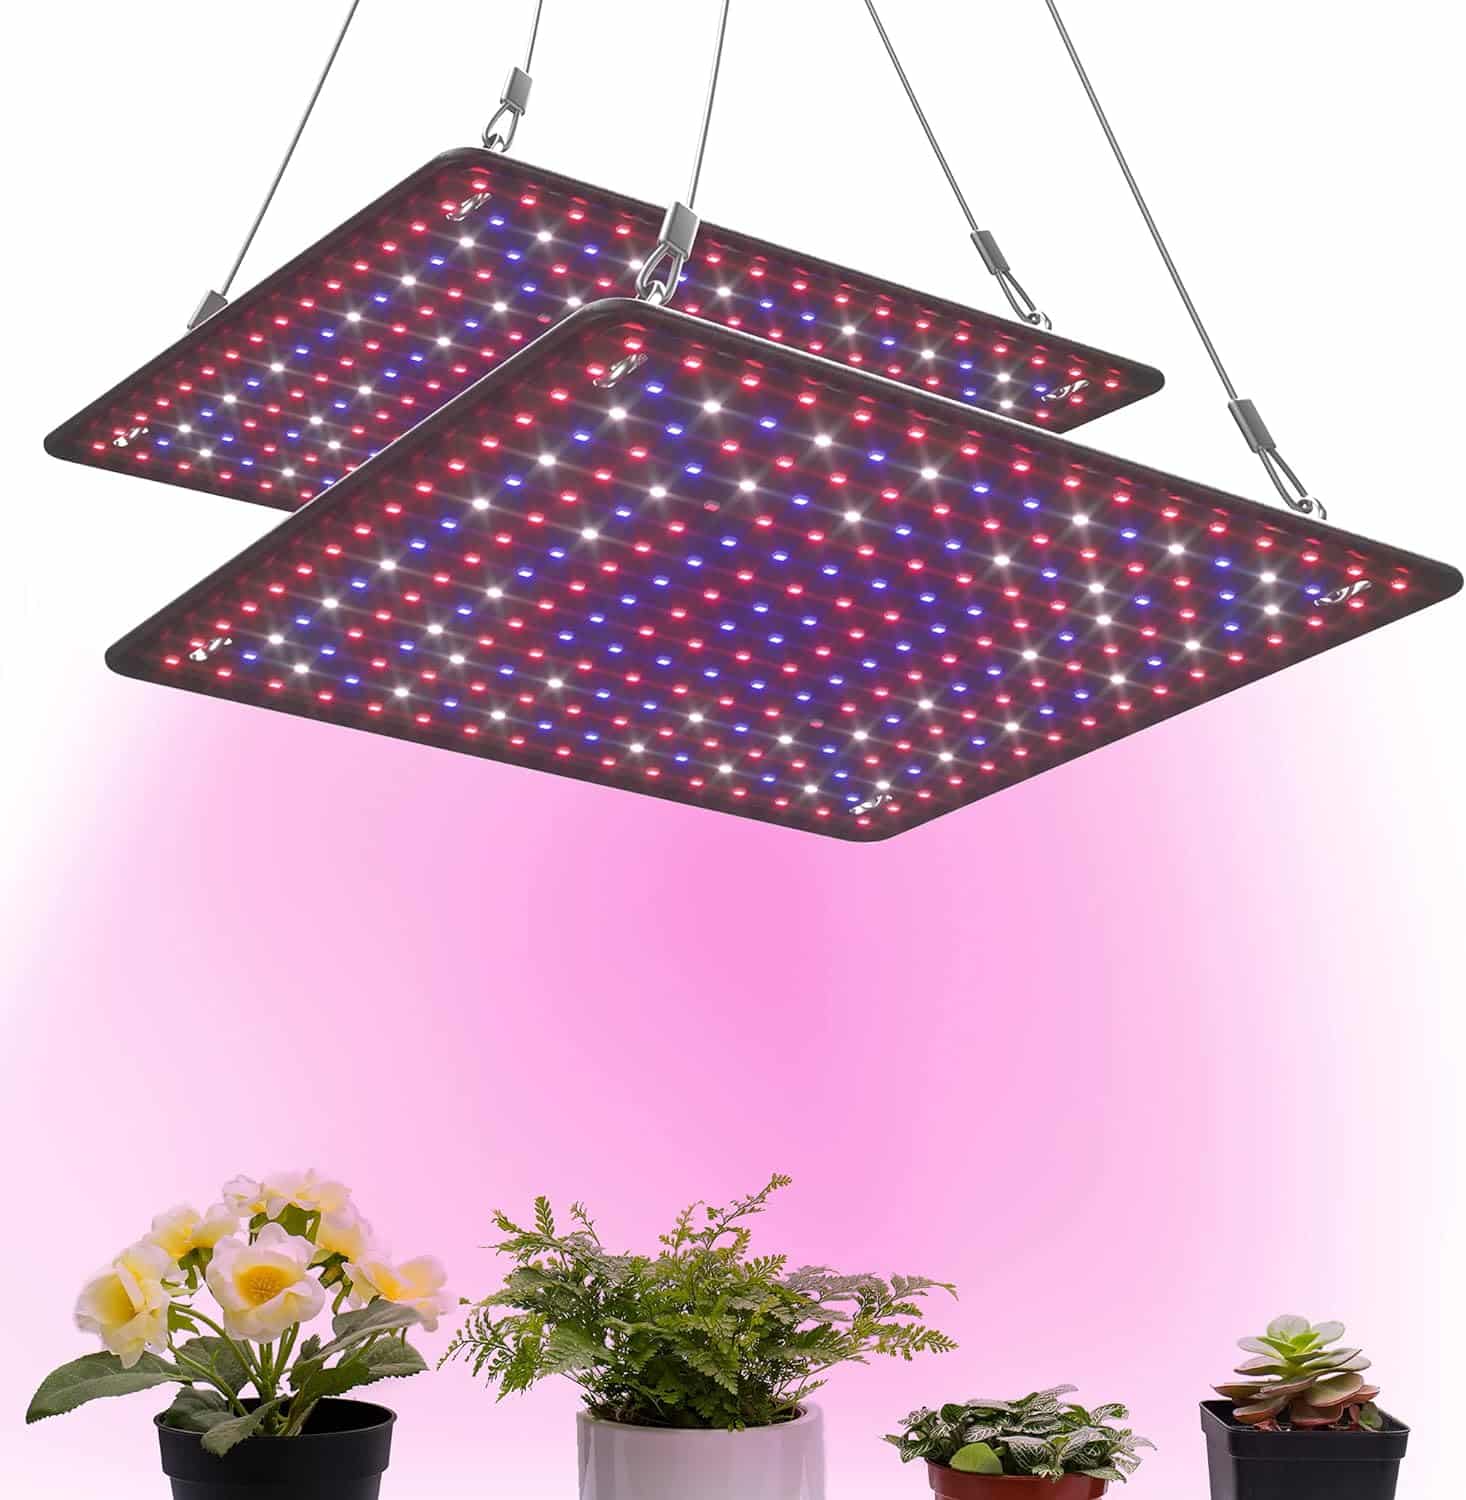 Uallhome 2 Pack LED Grow Light Panel 200W Lamp for Indoor Plants, Full Spectrum with White Blue Red UV IR LEDs for 4x4ft Coverage Grow Tent Greenhouse Veg and Bloom Seedlings Hydroponics